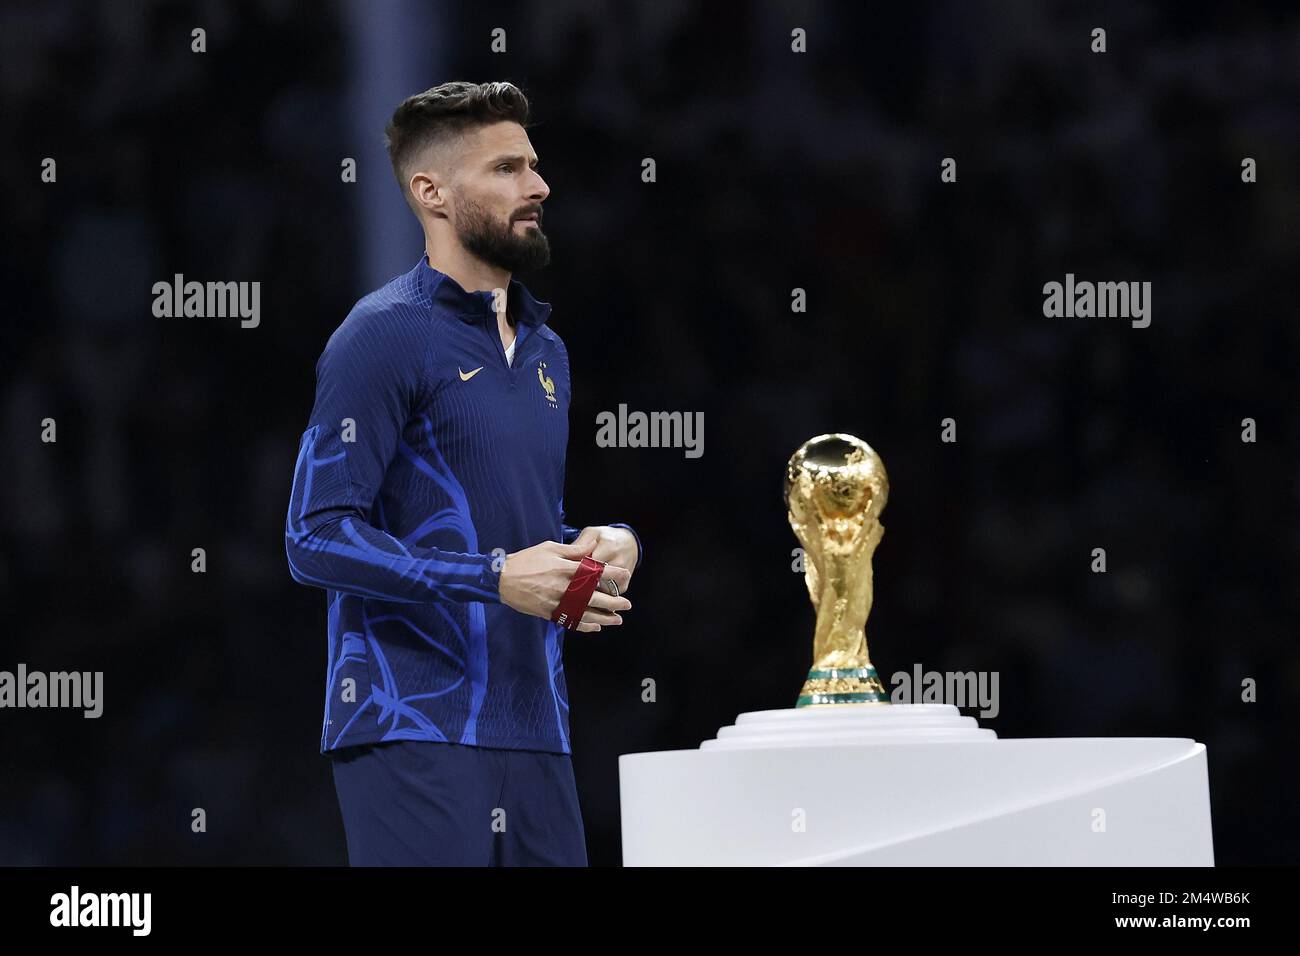 AL DAAYEN - Olivier Giroud of France after the FIFA World Cup Qatar 2022 final match between Argentina and France at Lusail Stadium on December 18, 2022 in Al Daayen, Qatar. AP | Dutch Height | MAURICE OF STONE Stock Photo